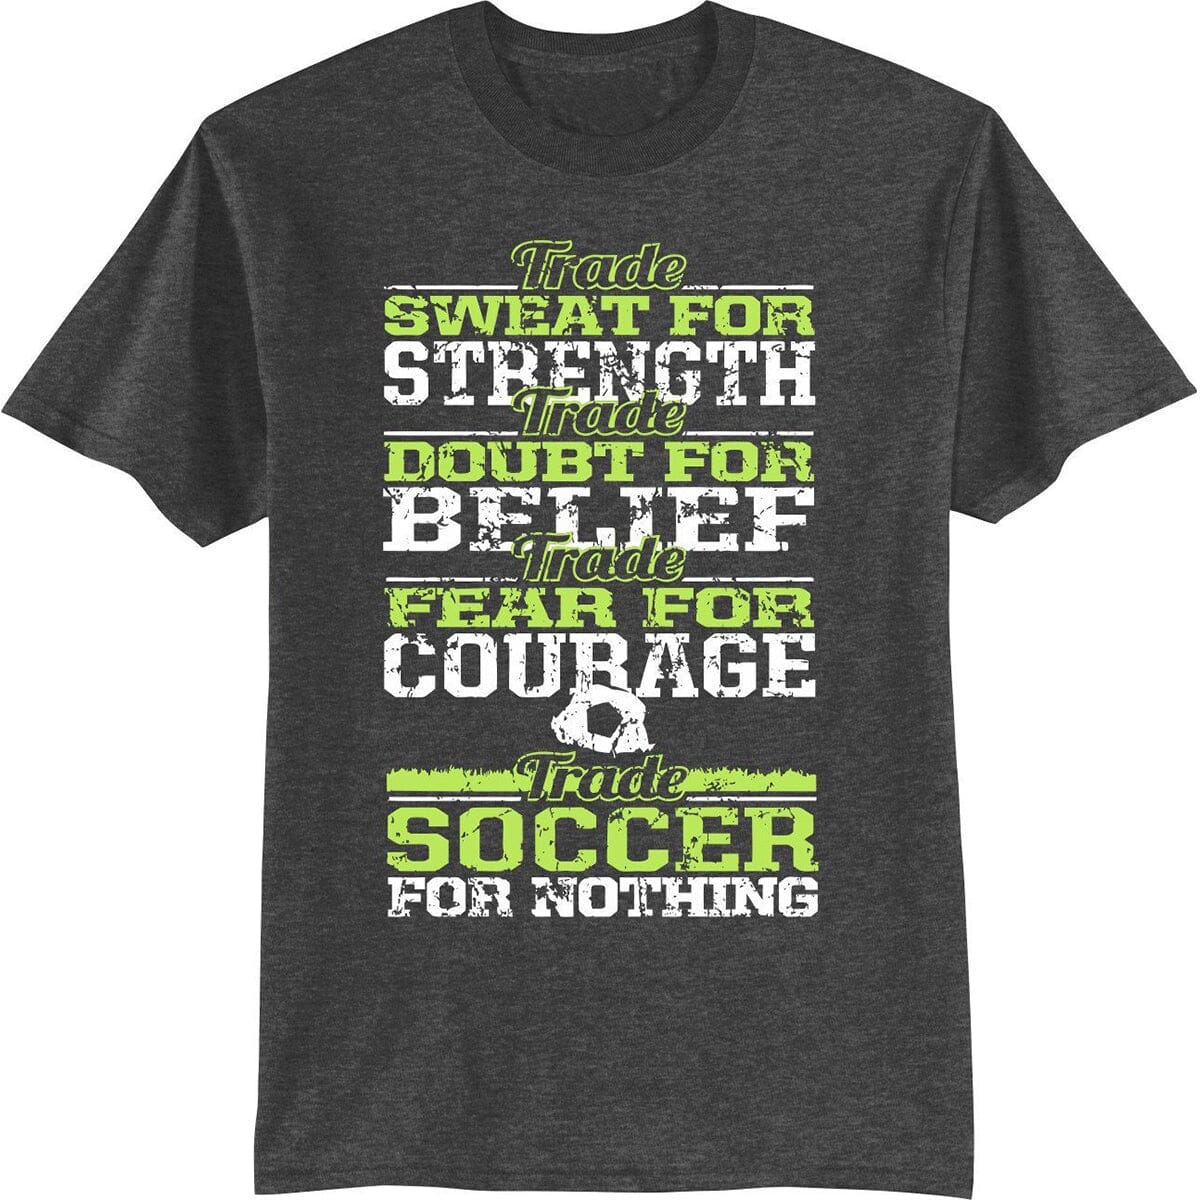 Trade Soccer for Nothing T-Shirt Humorous Shirt 411 Youth Small Charcoal Heather 